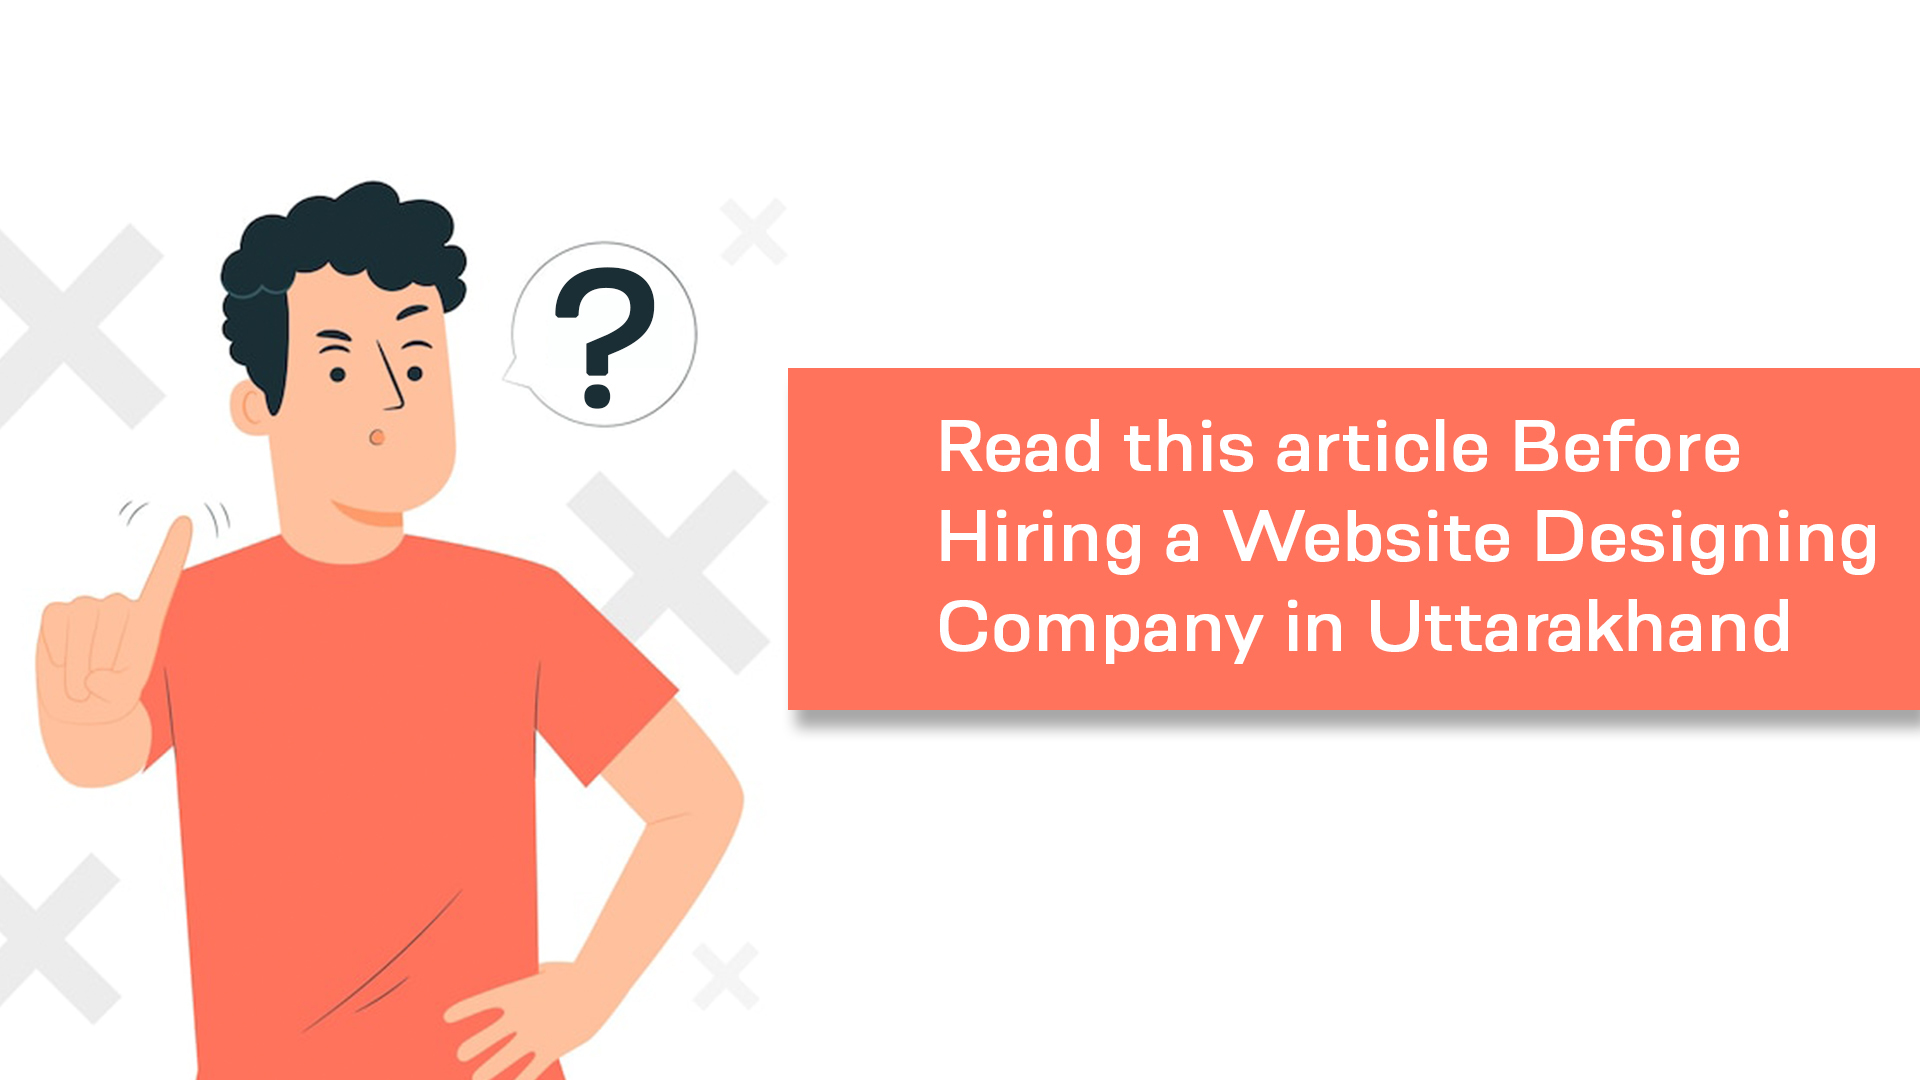 Considerations Before Hiring a Website Designing Company in Uttarakhand